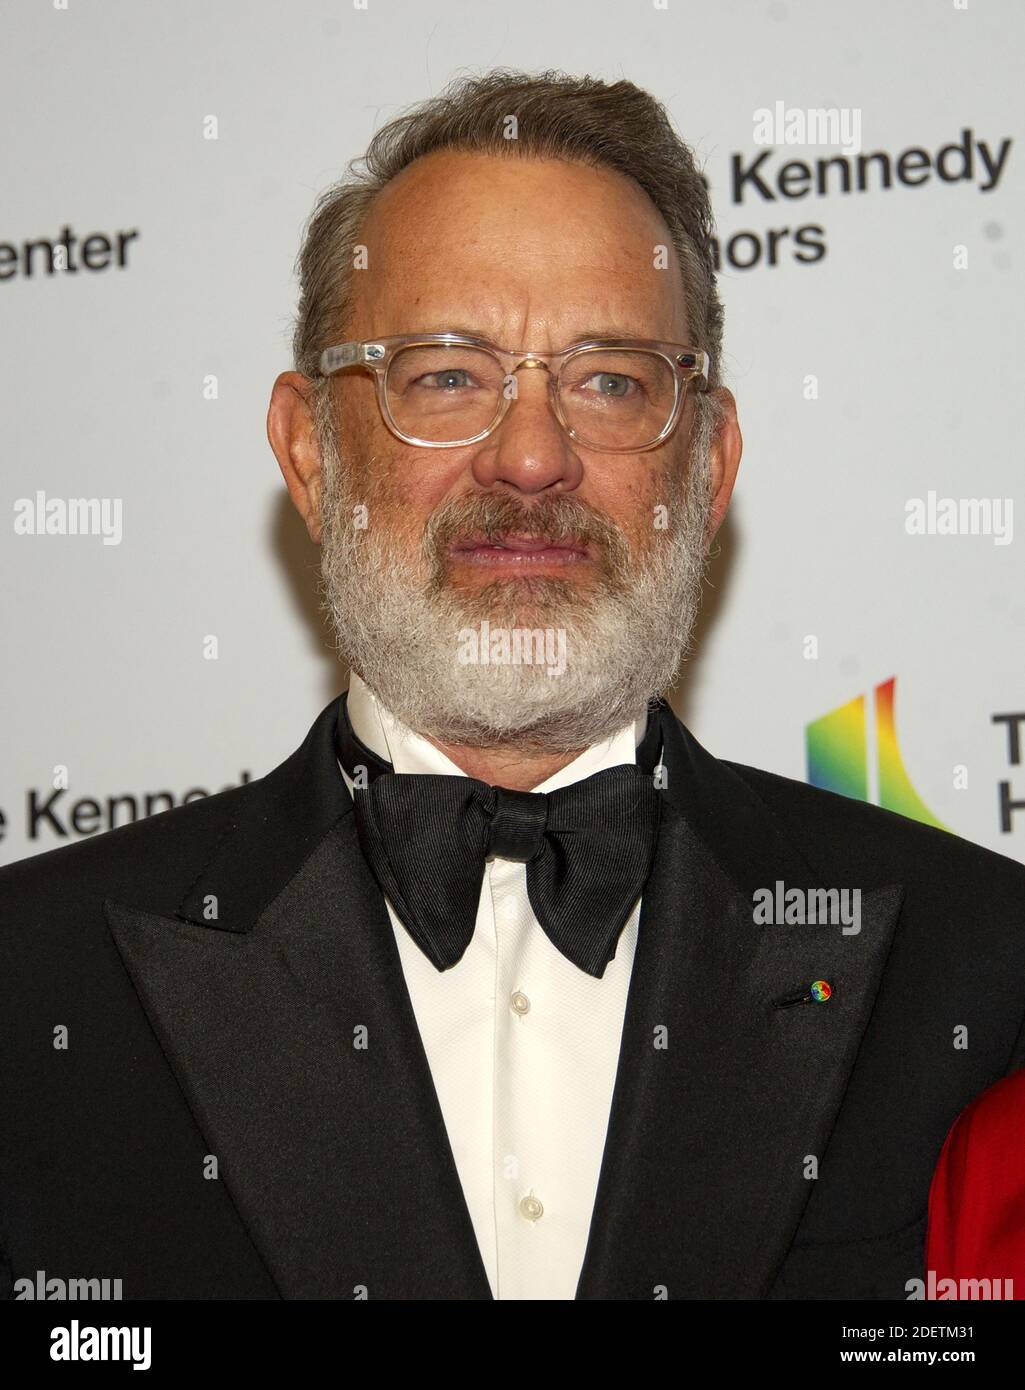 Tom Hanks arrives for the formal Artist's Dinner honoring the recipients of the 42nd Annual Kennedy Center Honors at the United States Department of State in Washington, D.C. on Saturday, December 7, 2019. The 2019 honorees are: Earth, Wind & Fire, Sally Field, Linda Ronstadt, Sesame Street, and Michael Tilson Thomas. Photo by Ron Sachs/Pool via CNP/ABACAPRESS.COM Stock Photo